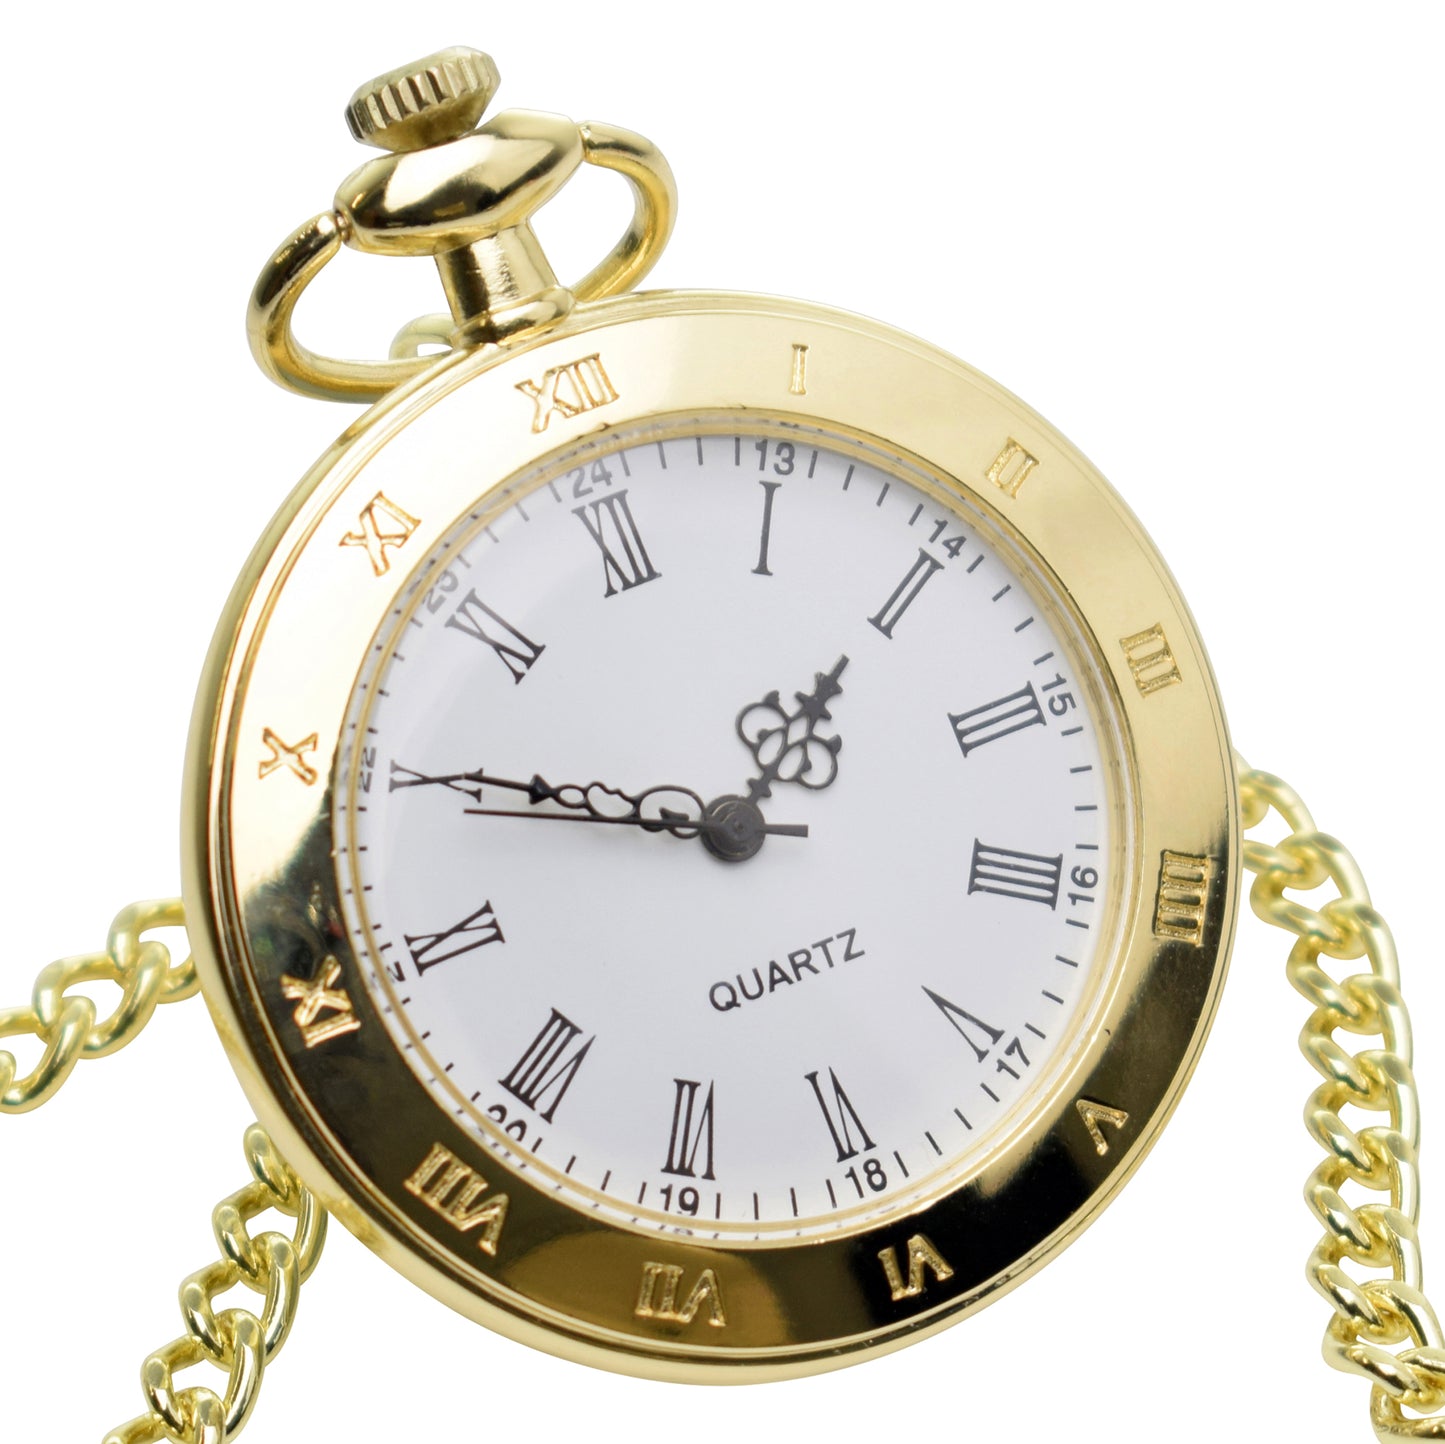 Open Front Roman Numeral Gold Pocket Watch